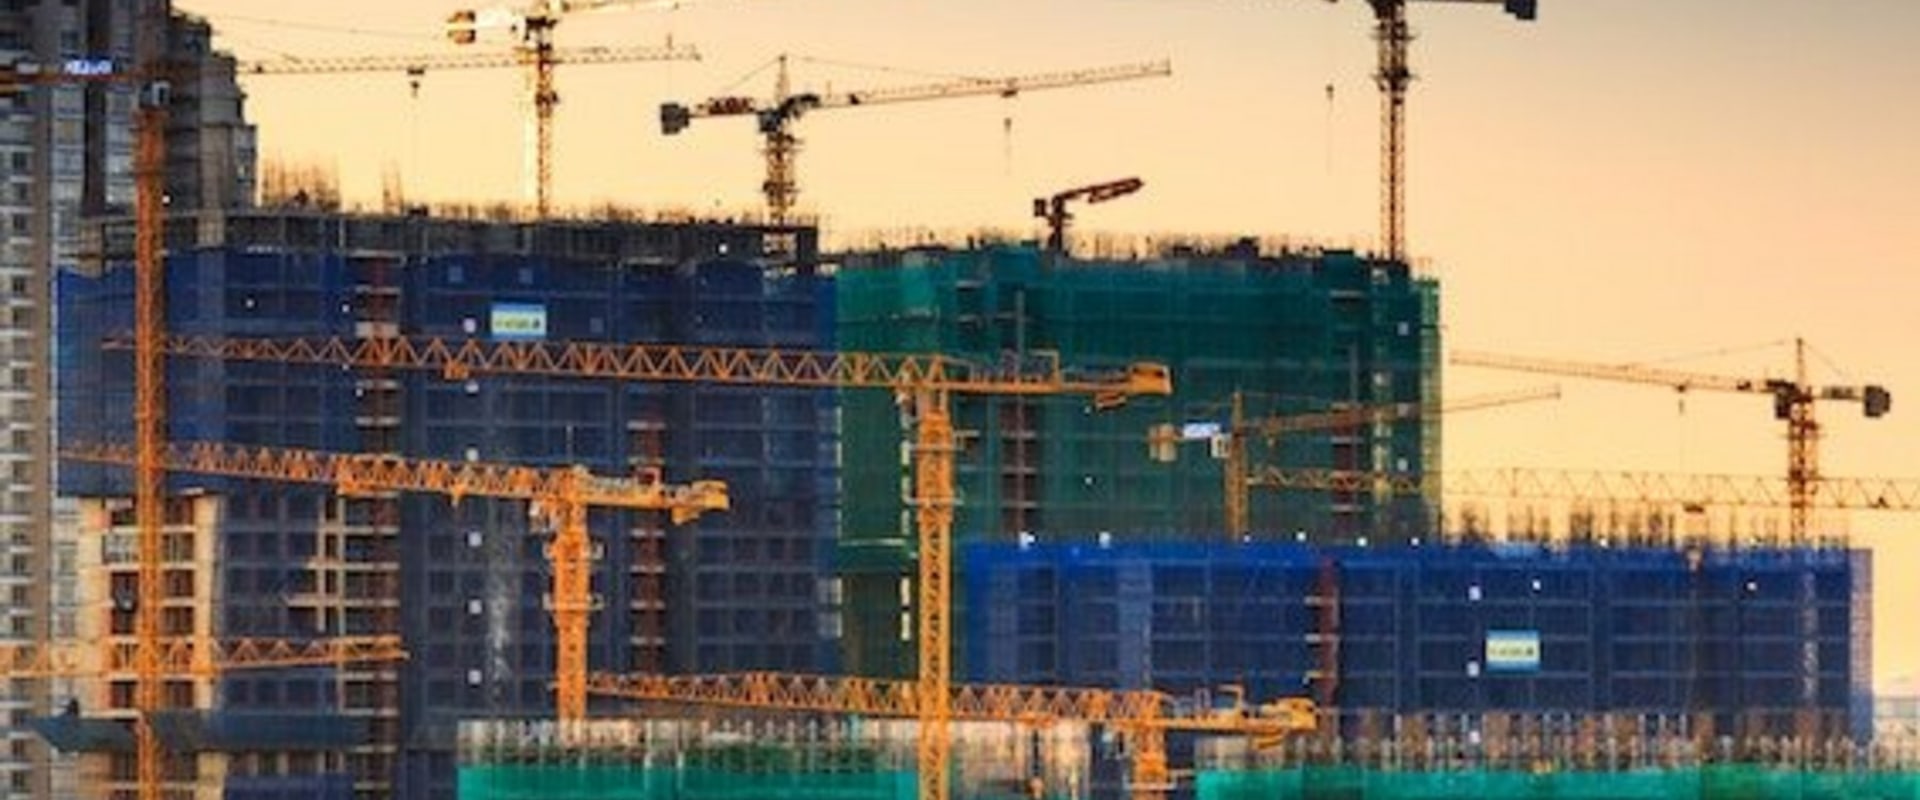 The Top Construction Companies in the World: A Closer Look at the Leaders